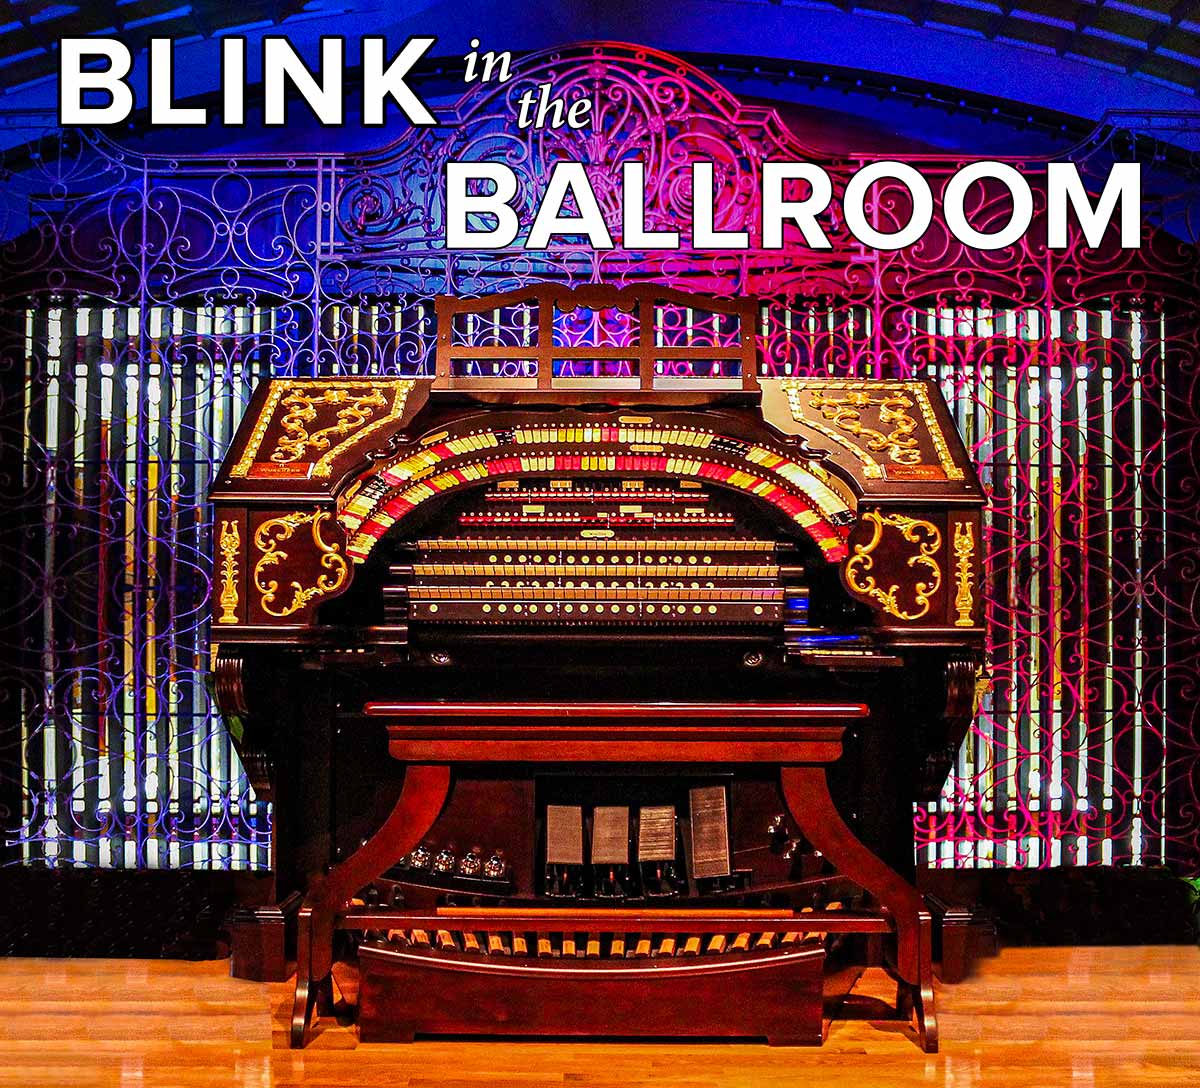 Blink in the Ballroom October 13 to 16, 2022